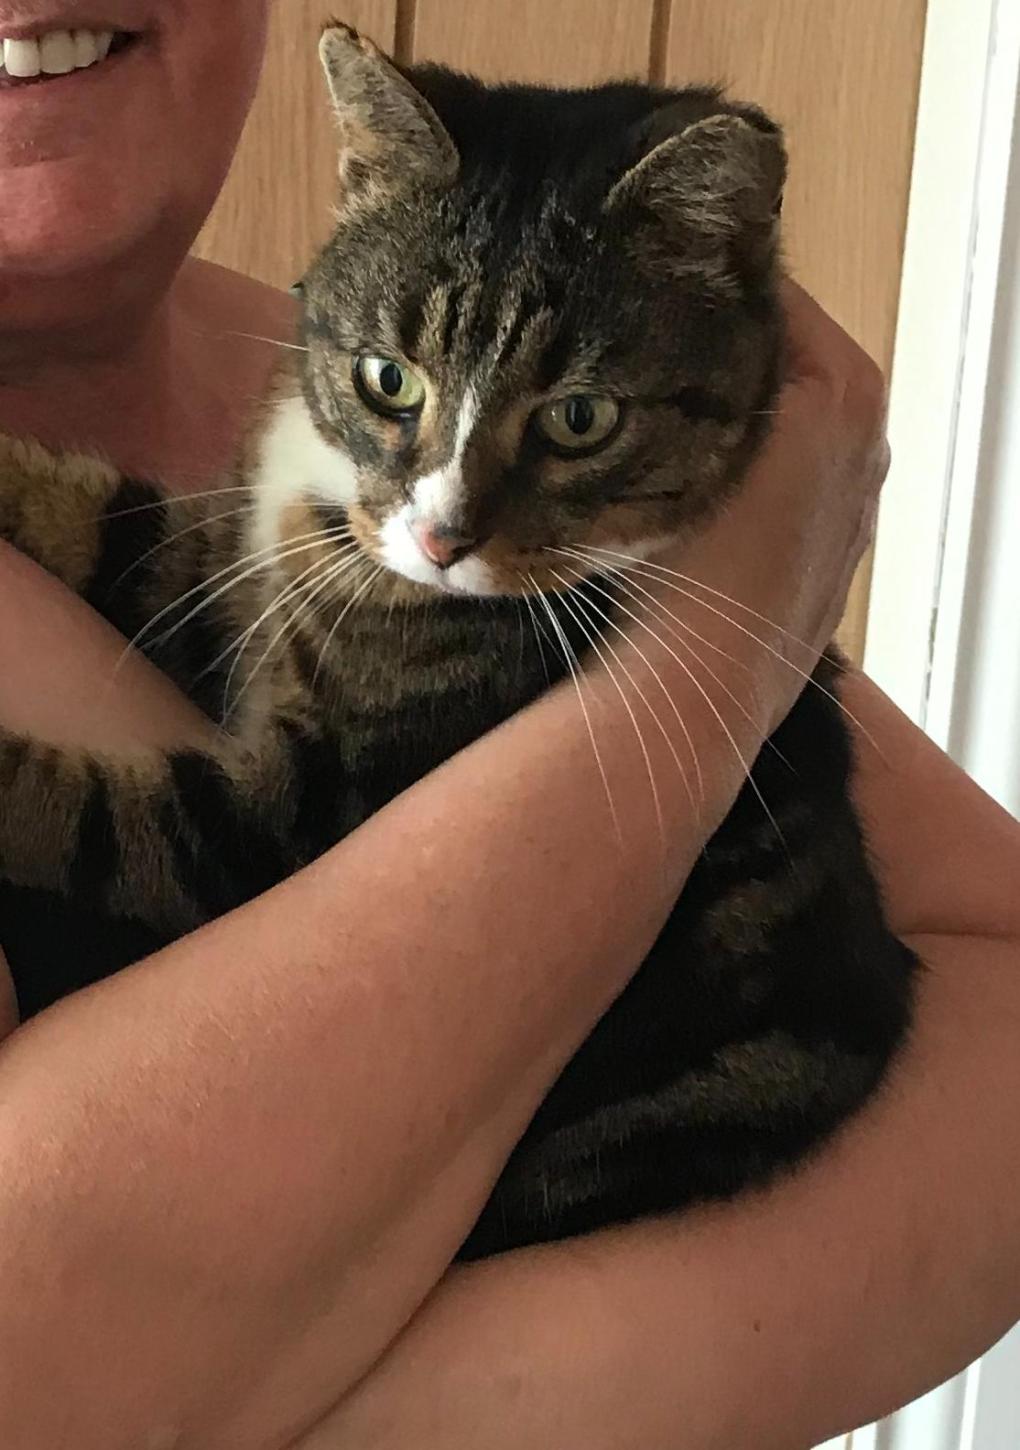 Missing cat Reunited With Owner After Seven Painful Weeks of Worry